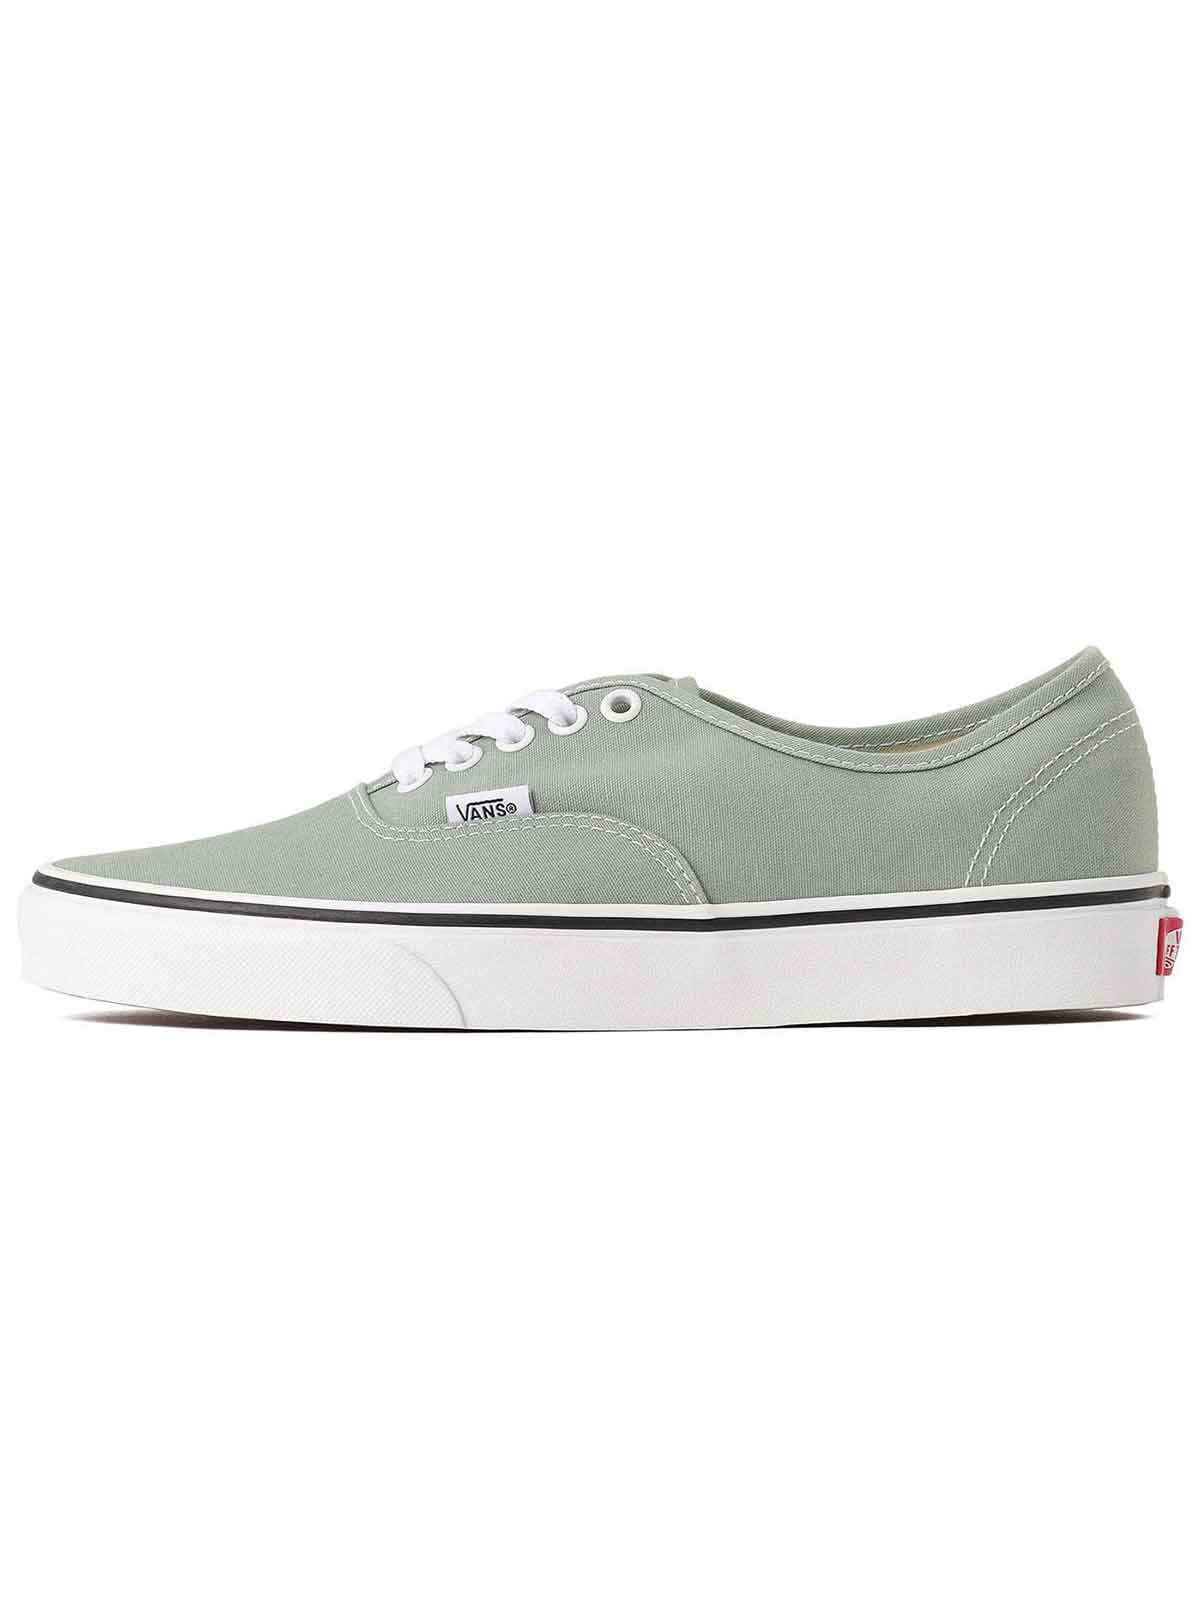   Vans | Authentic Color Theory Iceberg | Mens Shoes